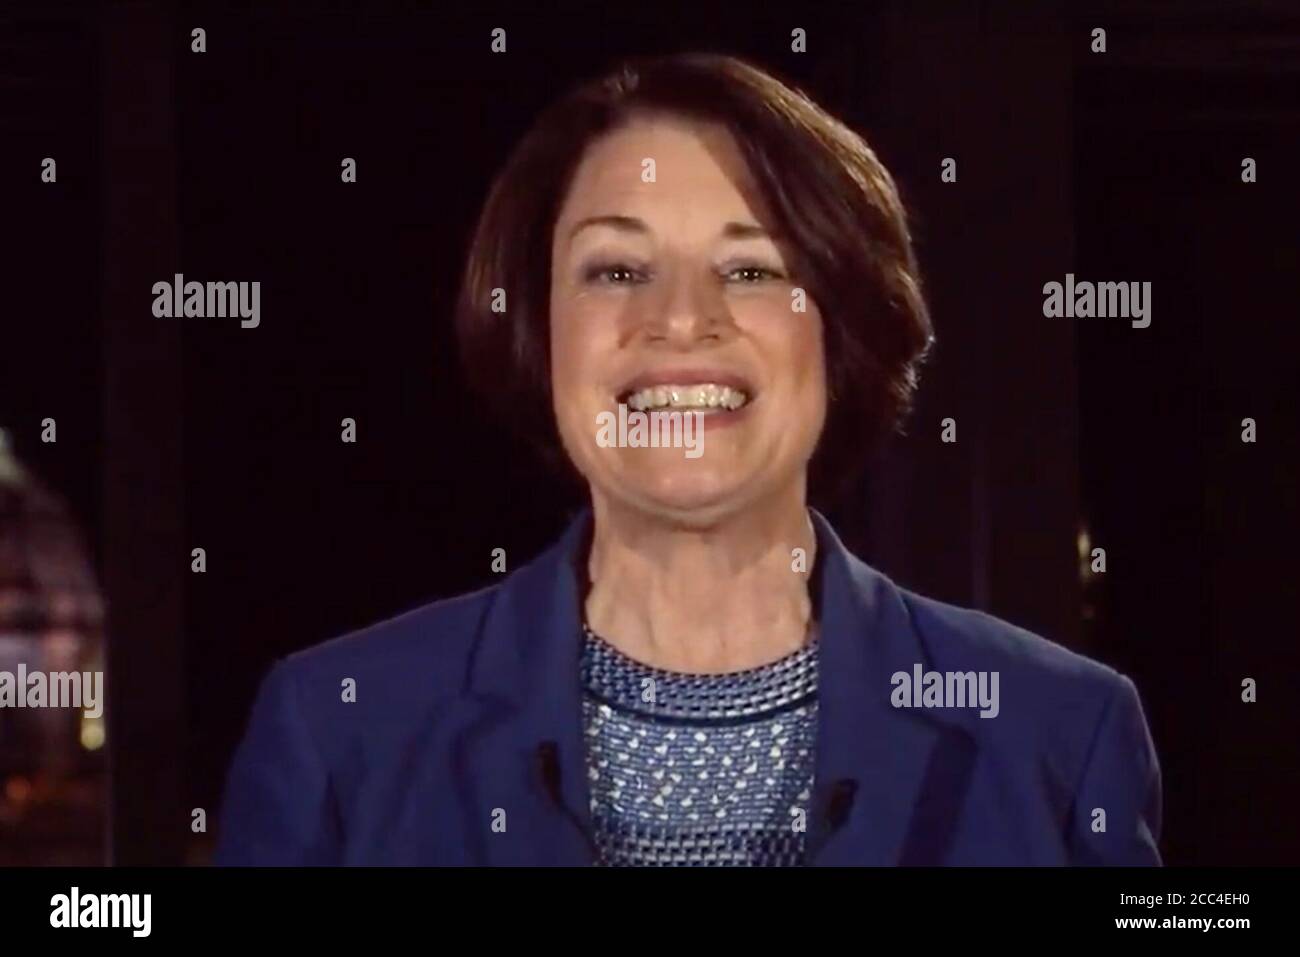 (200818) -- WASHINGTON, D.C., Aug. 18, 2020 (Xinhua) -- Former Democratic presidential candidate, U.S. Senator Amy Klobuchar speaks in a frame grab from a video feed of the 2020 Democratic National Convention, being held virtually amid the novel coronavirus pandemic, as participants from across the country are hosted over video with the control center in Milwaukee, Wisconsin, the United States, Aug. 17, 2020.  The almost entirely virtual 2020 U.S. Democratic National Convention kicked off on Monday night.   During the four-day event, presumptive Democratic presidential nominee Joe Biden will a Stock Photo